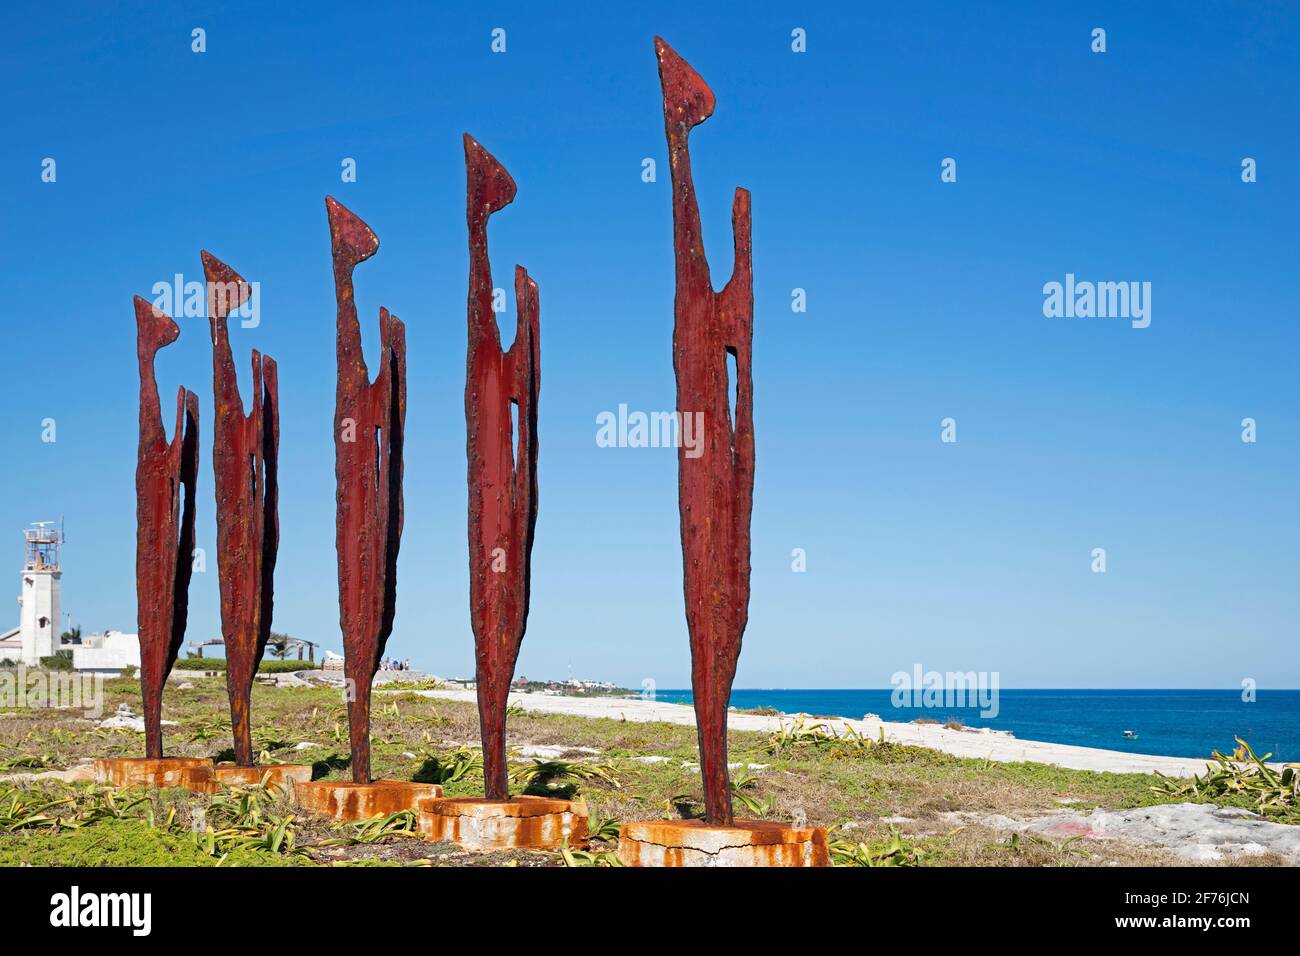 Contemporary art in the Punta Sur Sculpture Garden on Isla Mujeres, island in Mexican state Quintana Roo, north coast of Yucatán Peninsula, Mexico Stock Photo